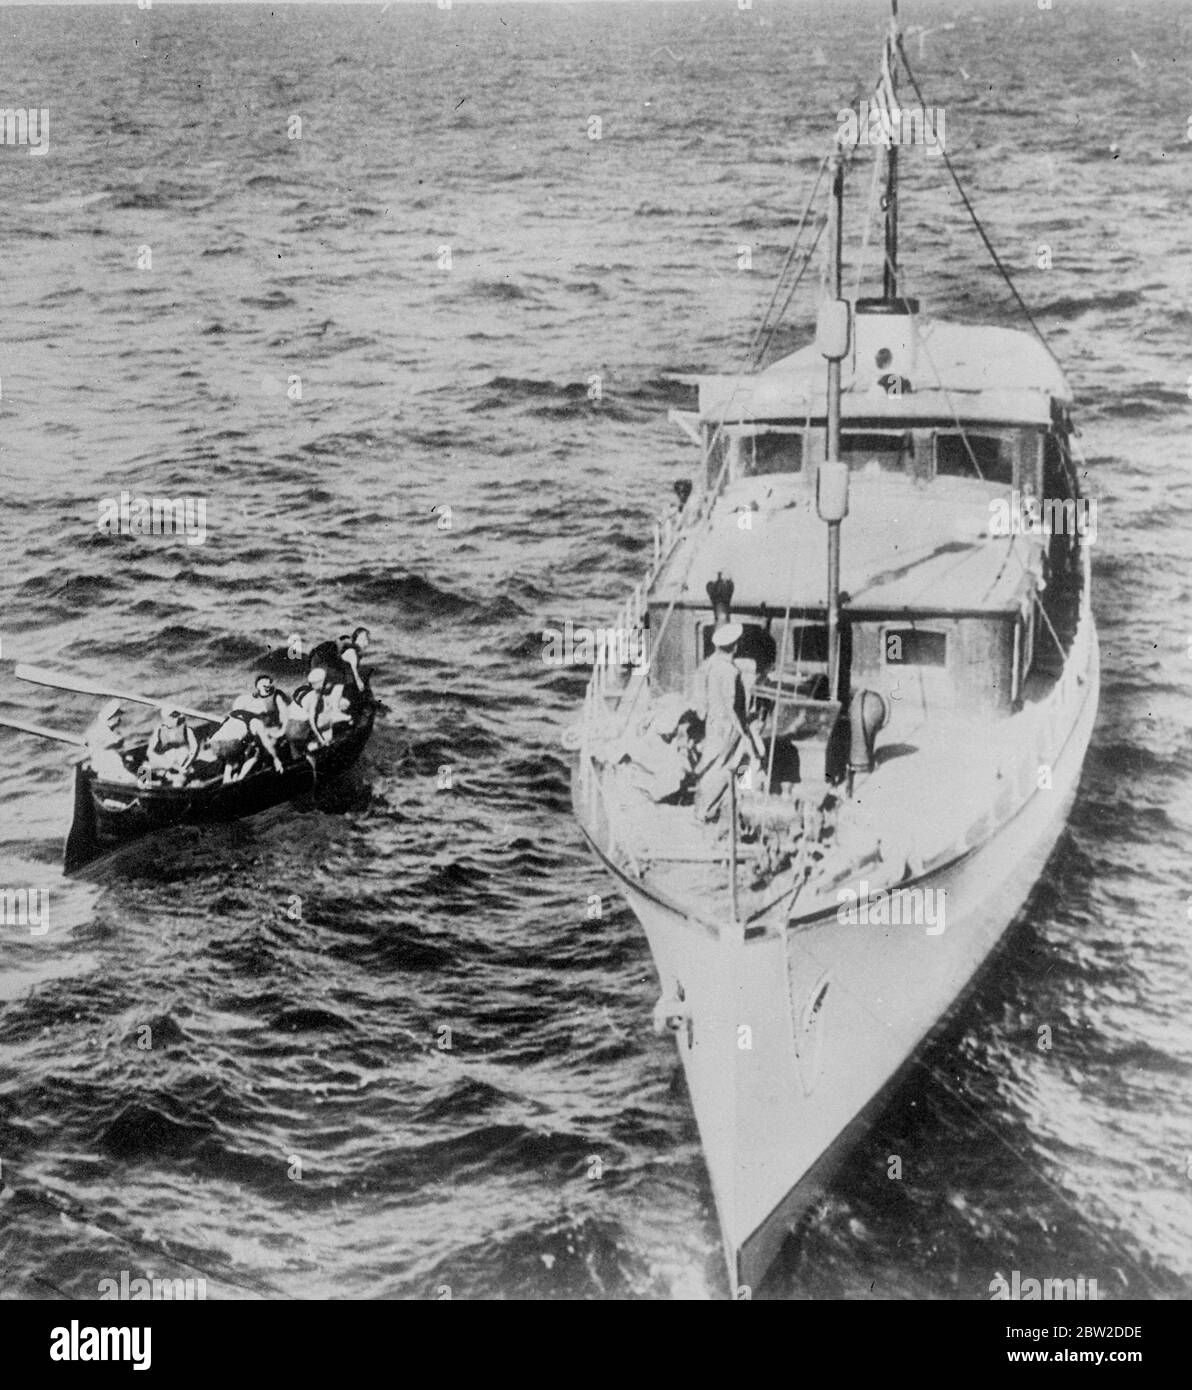 The sudden radio order which changed the course of the German freighter Schwaben led to the rescue of the disabled yacht Ling Dar, which was drifting in the Caribbean, far from usual shipping lanes. When the German ship found the yacht, the people aboard, including two women and a boy, was starving and had reached the last 2 gallons of fresh water. The freighter towed the yacht to Cartagena, Colombia, and resumed her voyage to Seattle. Photo shows: The rescue crew from the Schwaben pulling alongside the disabled yacht in the Caribbean Sea. 19 October 1938 Stock Photo